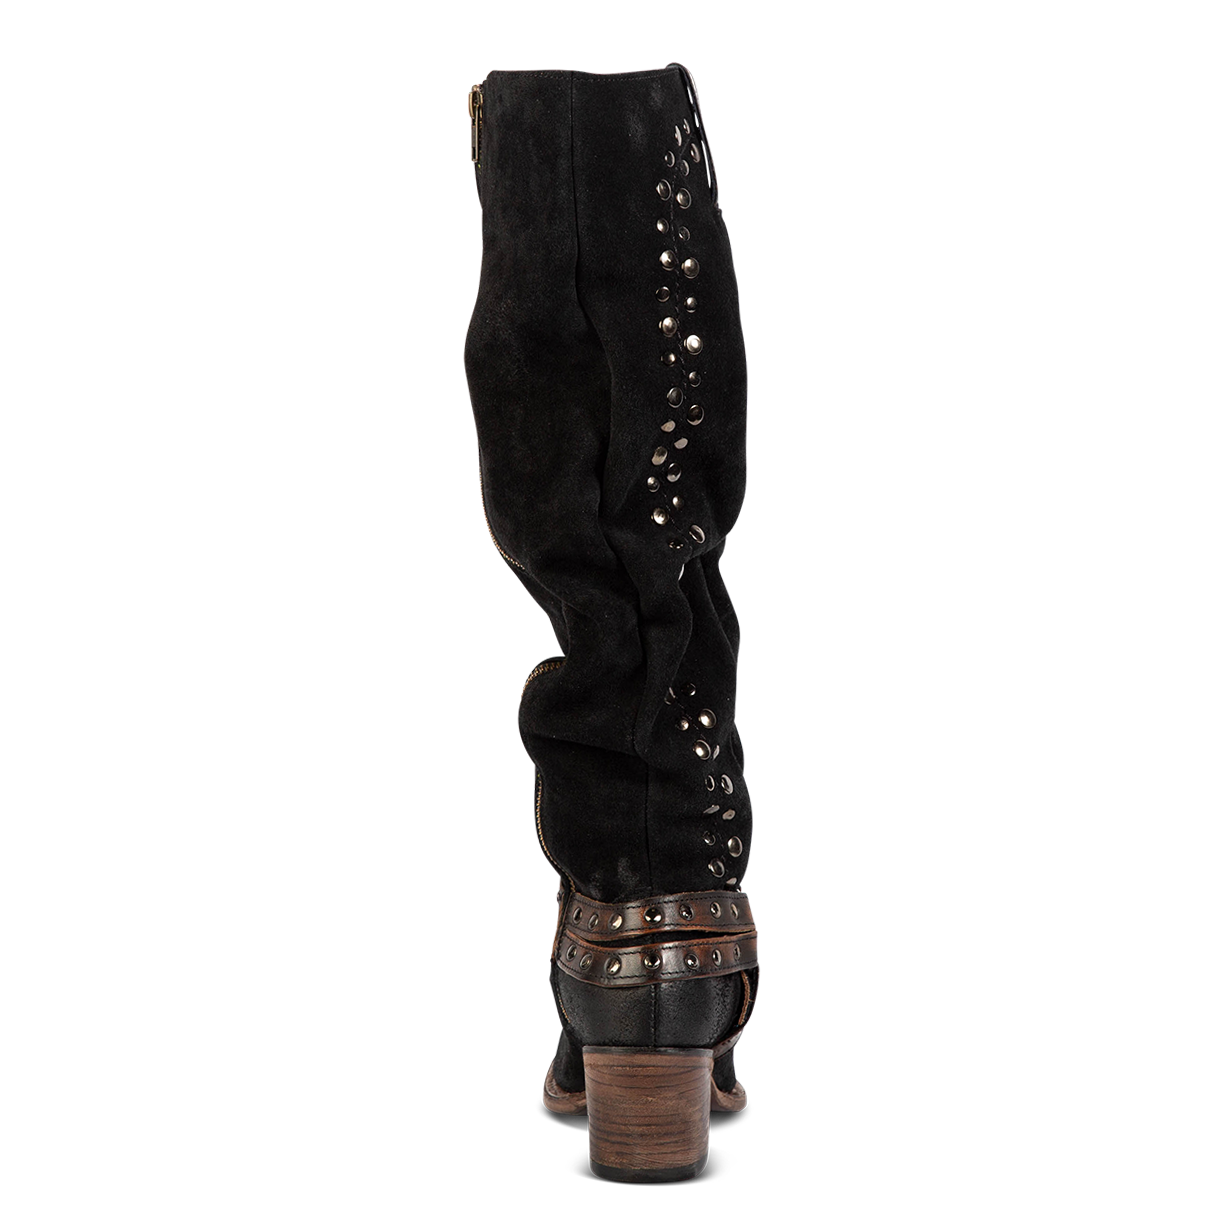 Back view showing tall suede shaft and contrasting heel and ankle harness on FREEBIRD womens Daisy black boot